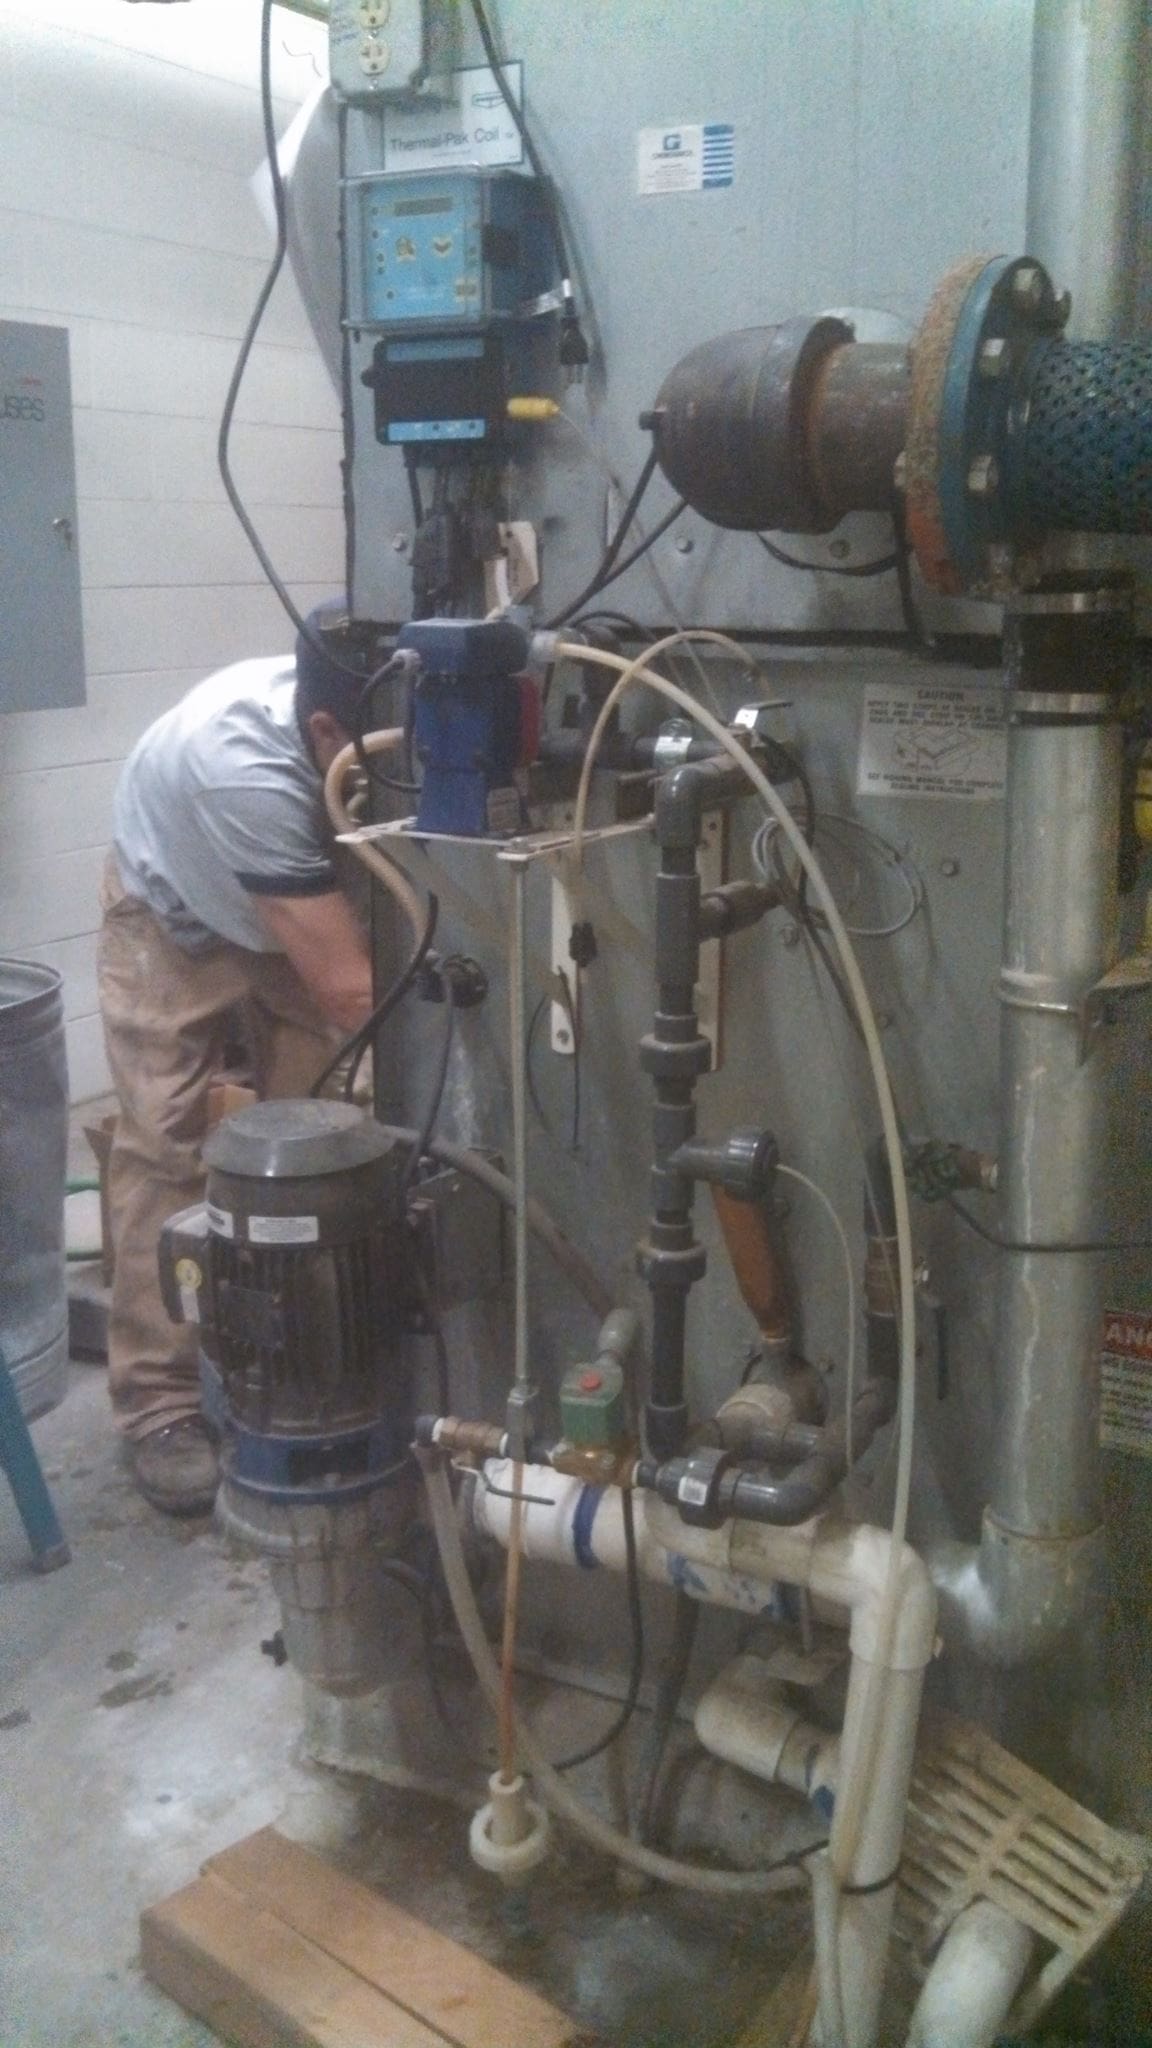 A technician from Eastern Oregon Heating and Air Conditioning LLC working on an HVAC unit in Hermiston, OR